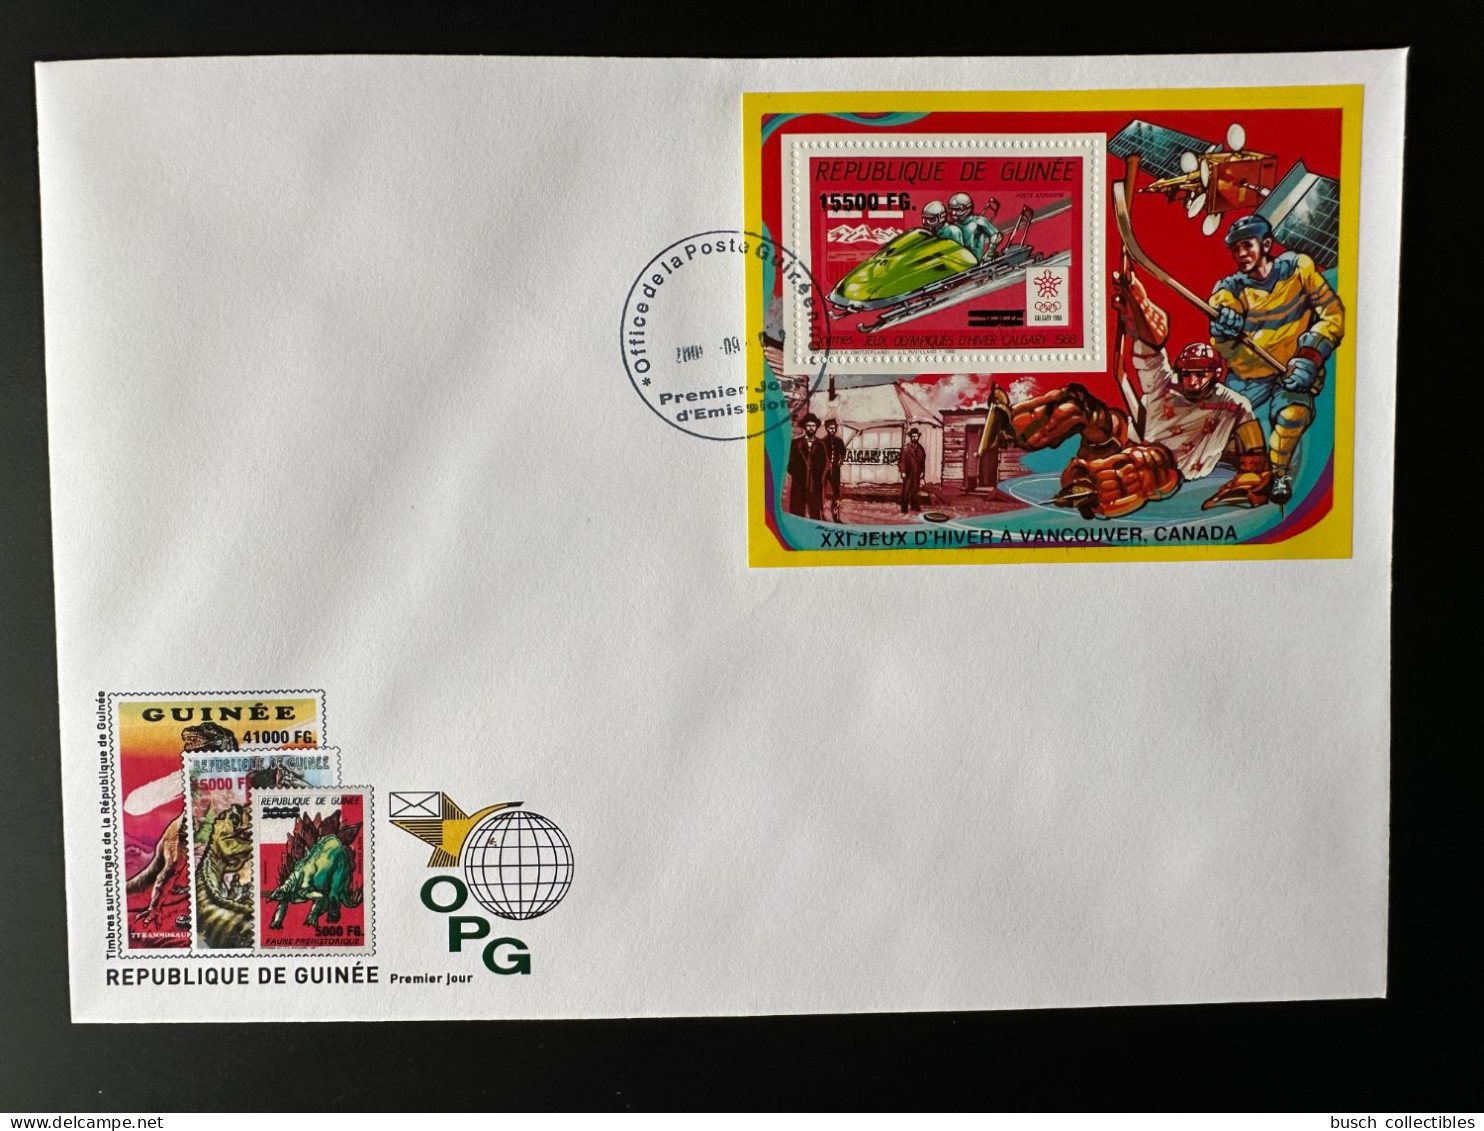 Guinée Guinea 2009 FDC Mi. Bl. 1727 Surch Overprint Winter Olympic Calgary 1988 Vancouver 2010 Jeux Olympiques Bobsleigh - Inverno2010: Vancouver